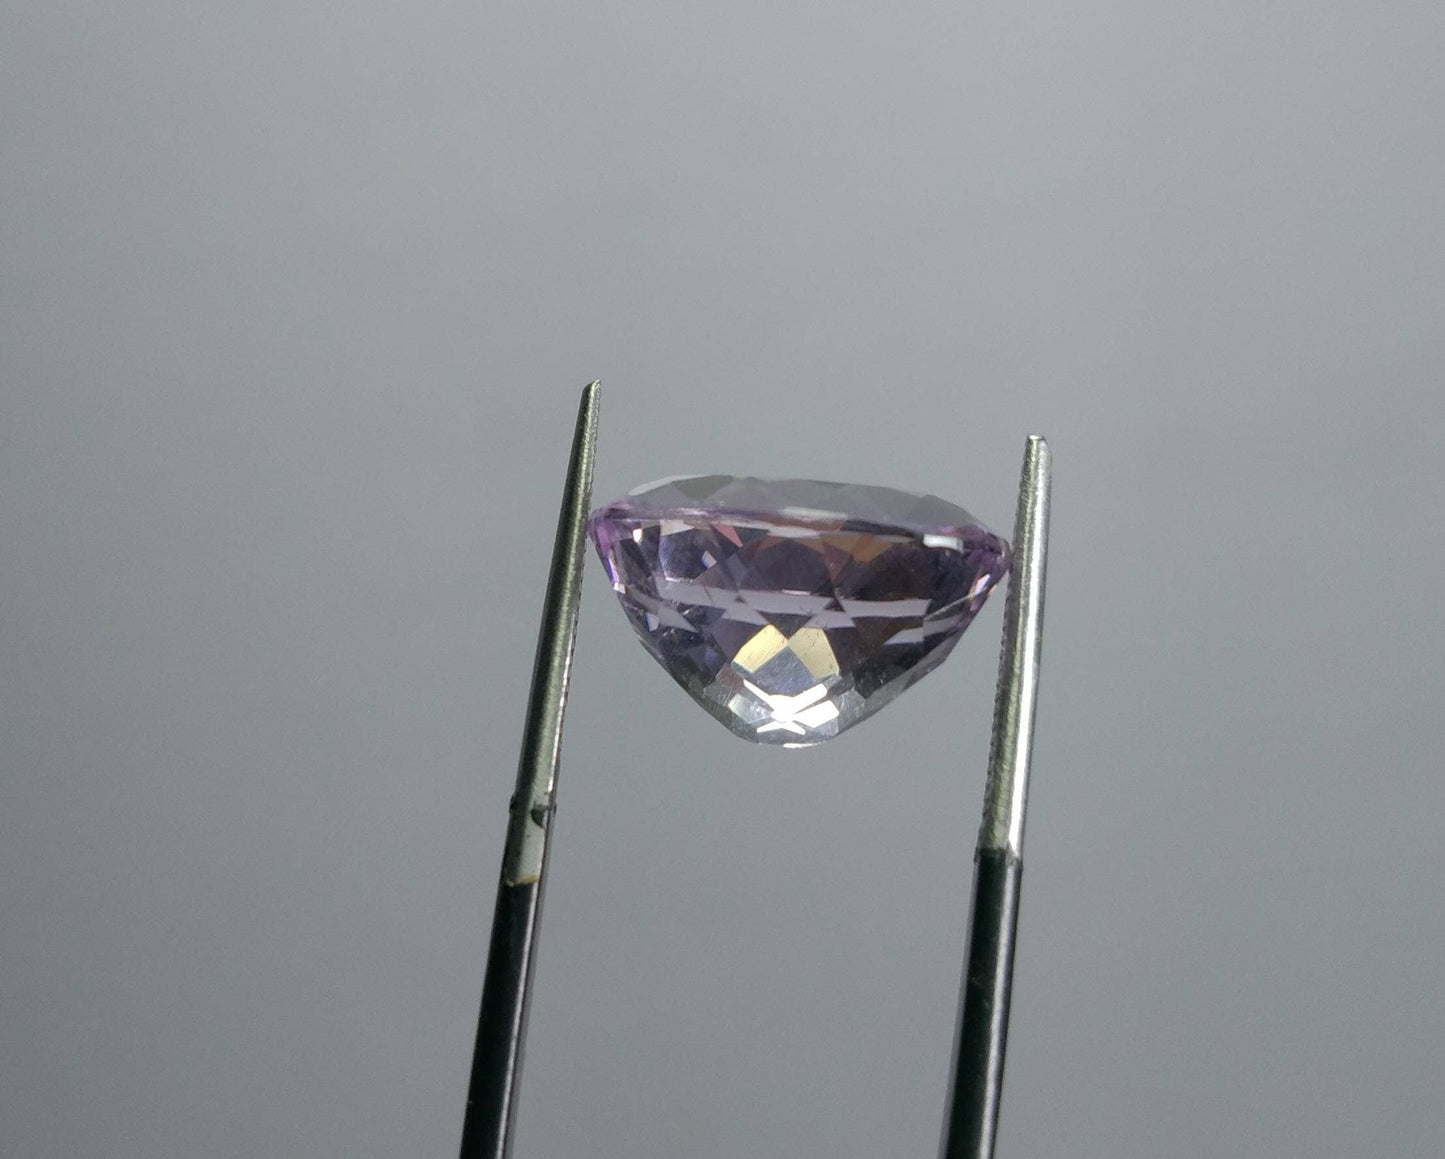 ARSAA GEMS AND MINERALSNatural fine quality beautiful 9 carats VV clarity faceted oval shape amethyst gem - Premium  from ARSAA GEMS AND MINERALS - Just $18.00! Shop now at ARSAA GEMS AND MINERALS